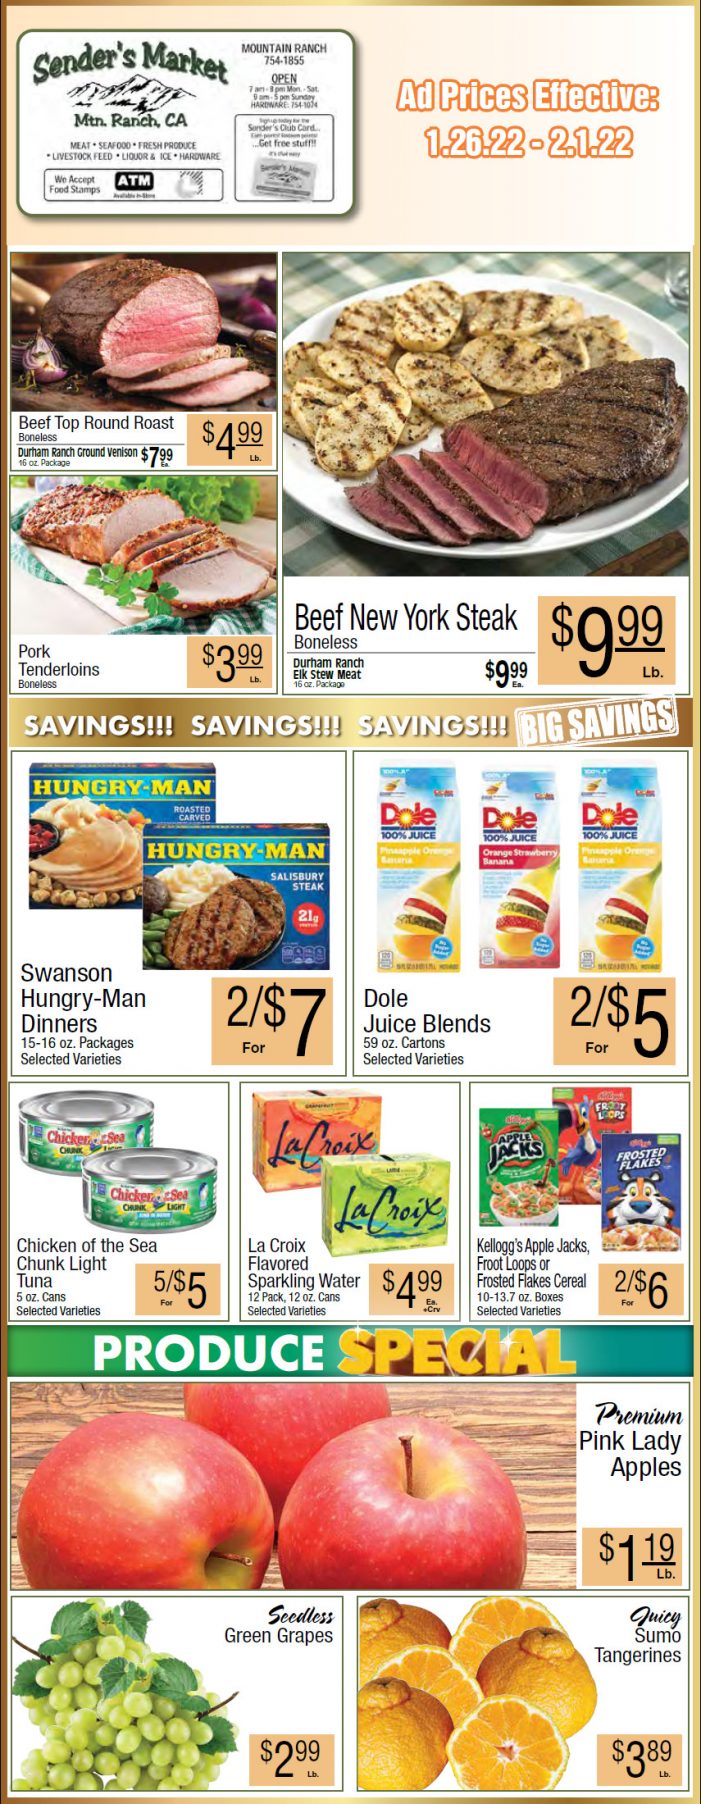 Sender’s Market’s Weekly Ad & Grocery Specials January 26th Through February 1st! Shop Local & Save!